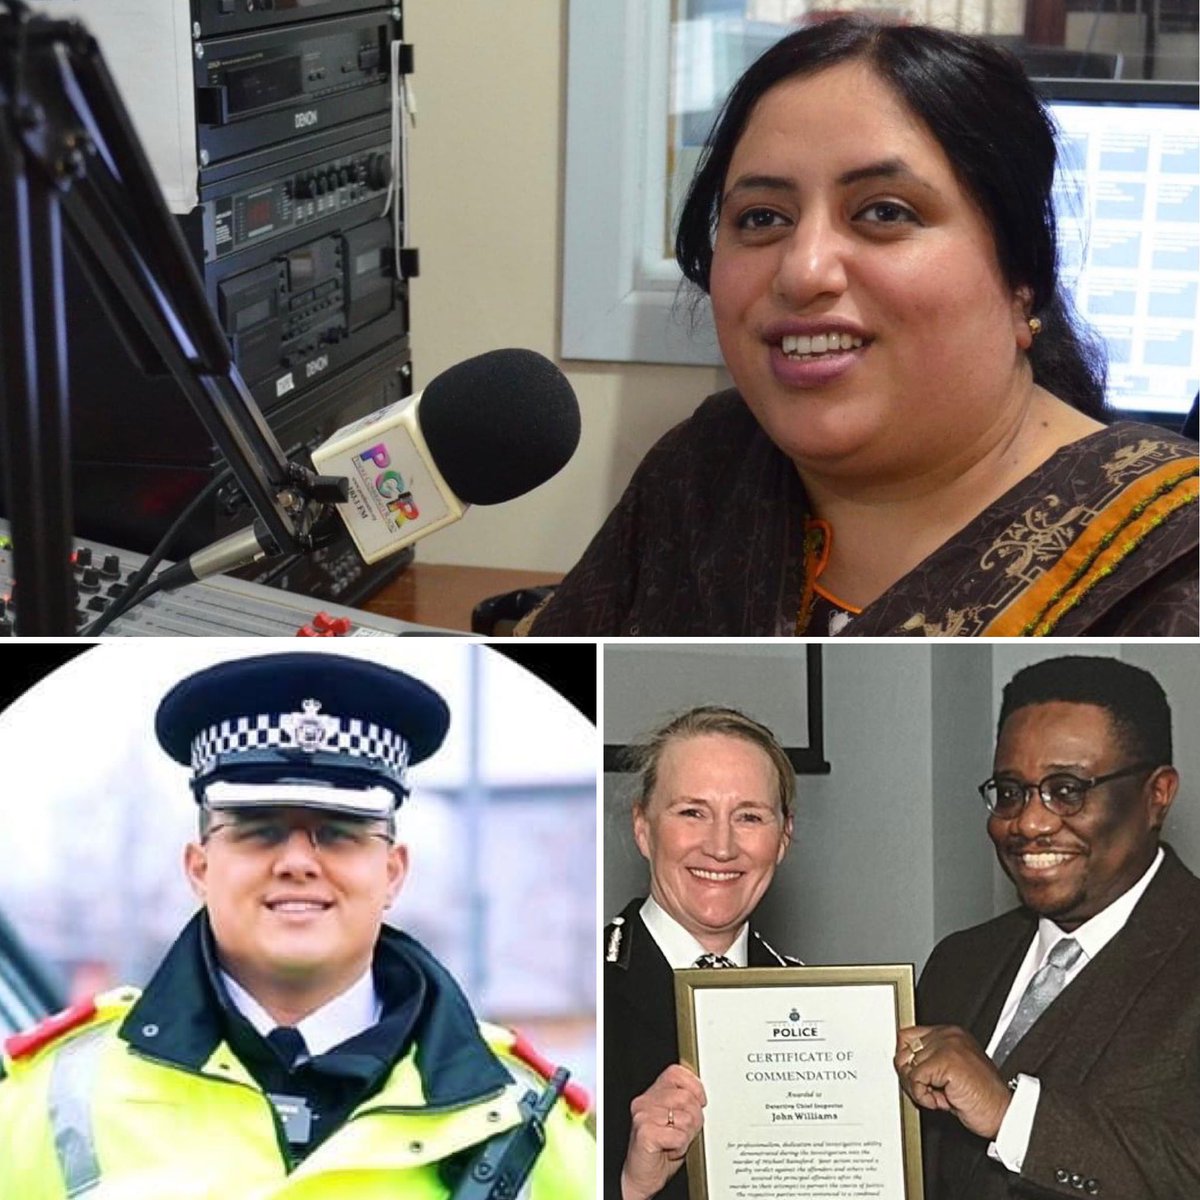 Tune into the ‘Let’s Talk’ radio show with presenter @sammyash786 LIVE on @pendleradio103 on Tues 7th Feb 2023 from 5pm till 7pm where she will be joined by Clifton John Williams & Chief Inspector Rob Budden BA (Hons) who will be discussing ‘Race Equality Week 2023 @MerPolFORE